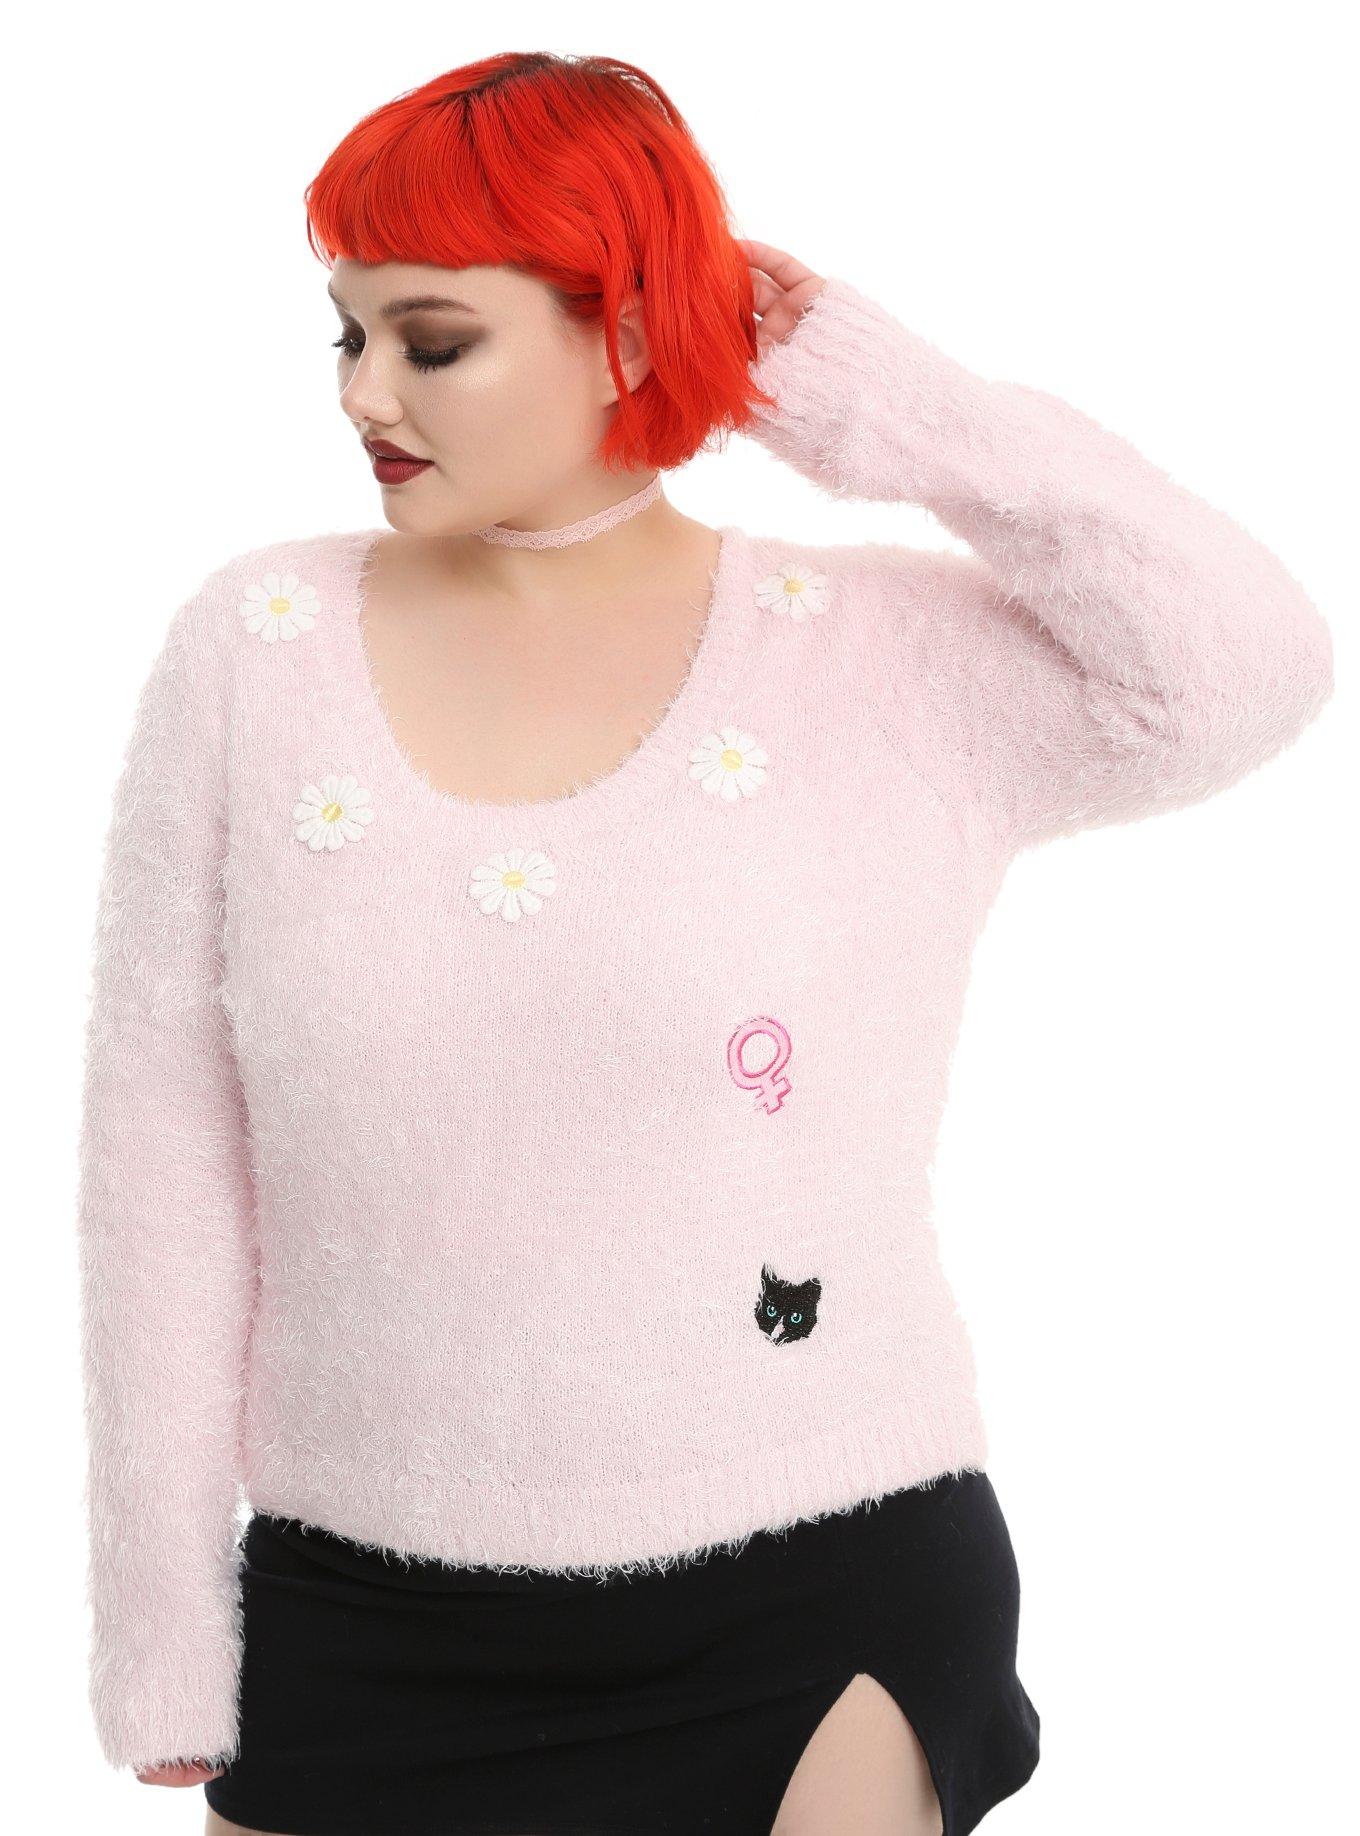 Buffy The Vampire Slayer Willow Fuzzy Sweater Plus Size, BLACK, hi-res